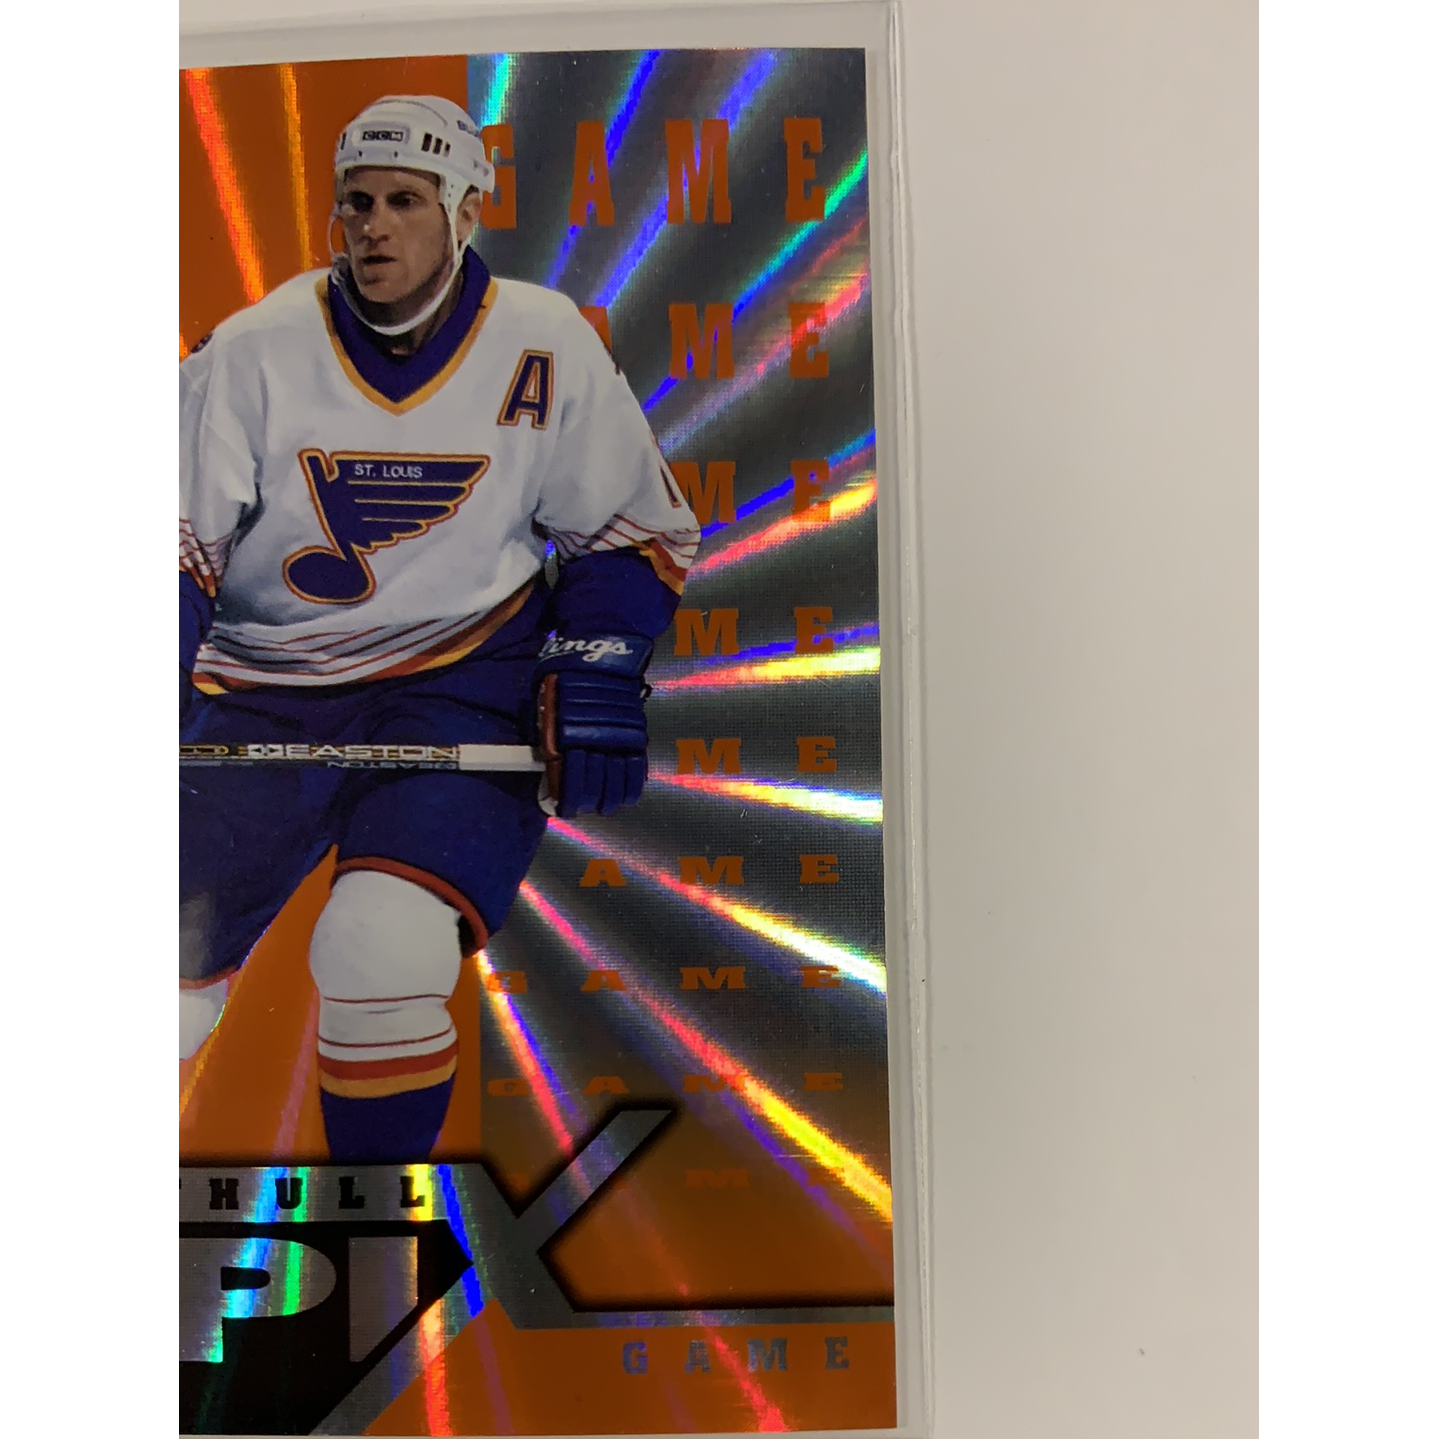  1997-98 Pinnacle Brett Hull Epix Orange Game  Local Legends Cards & Collectibles